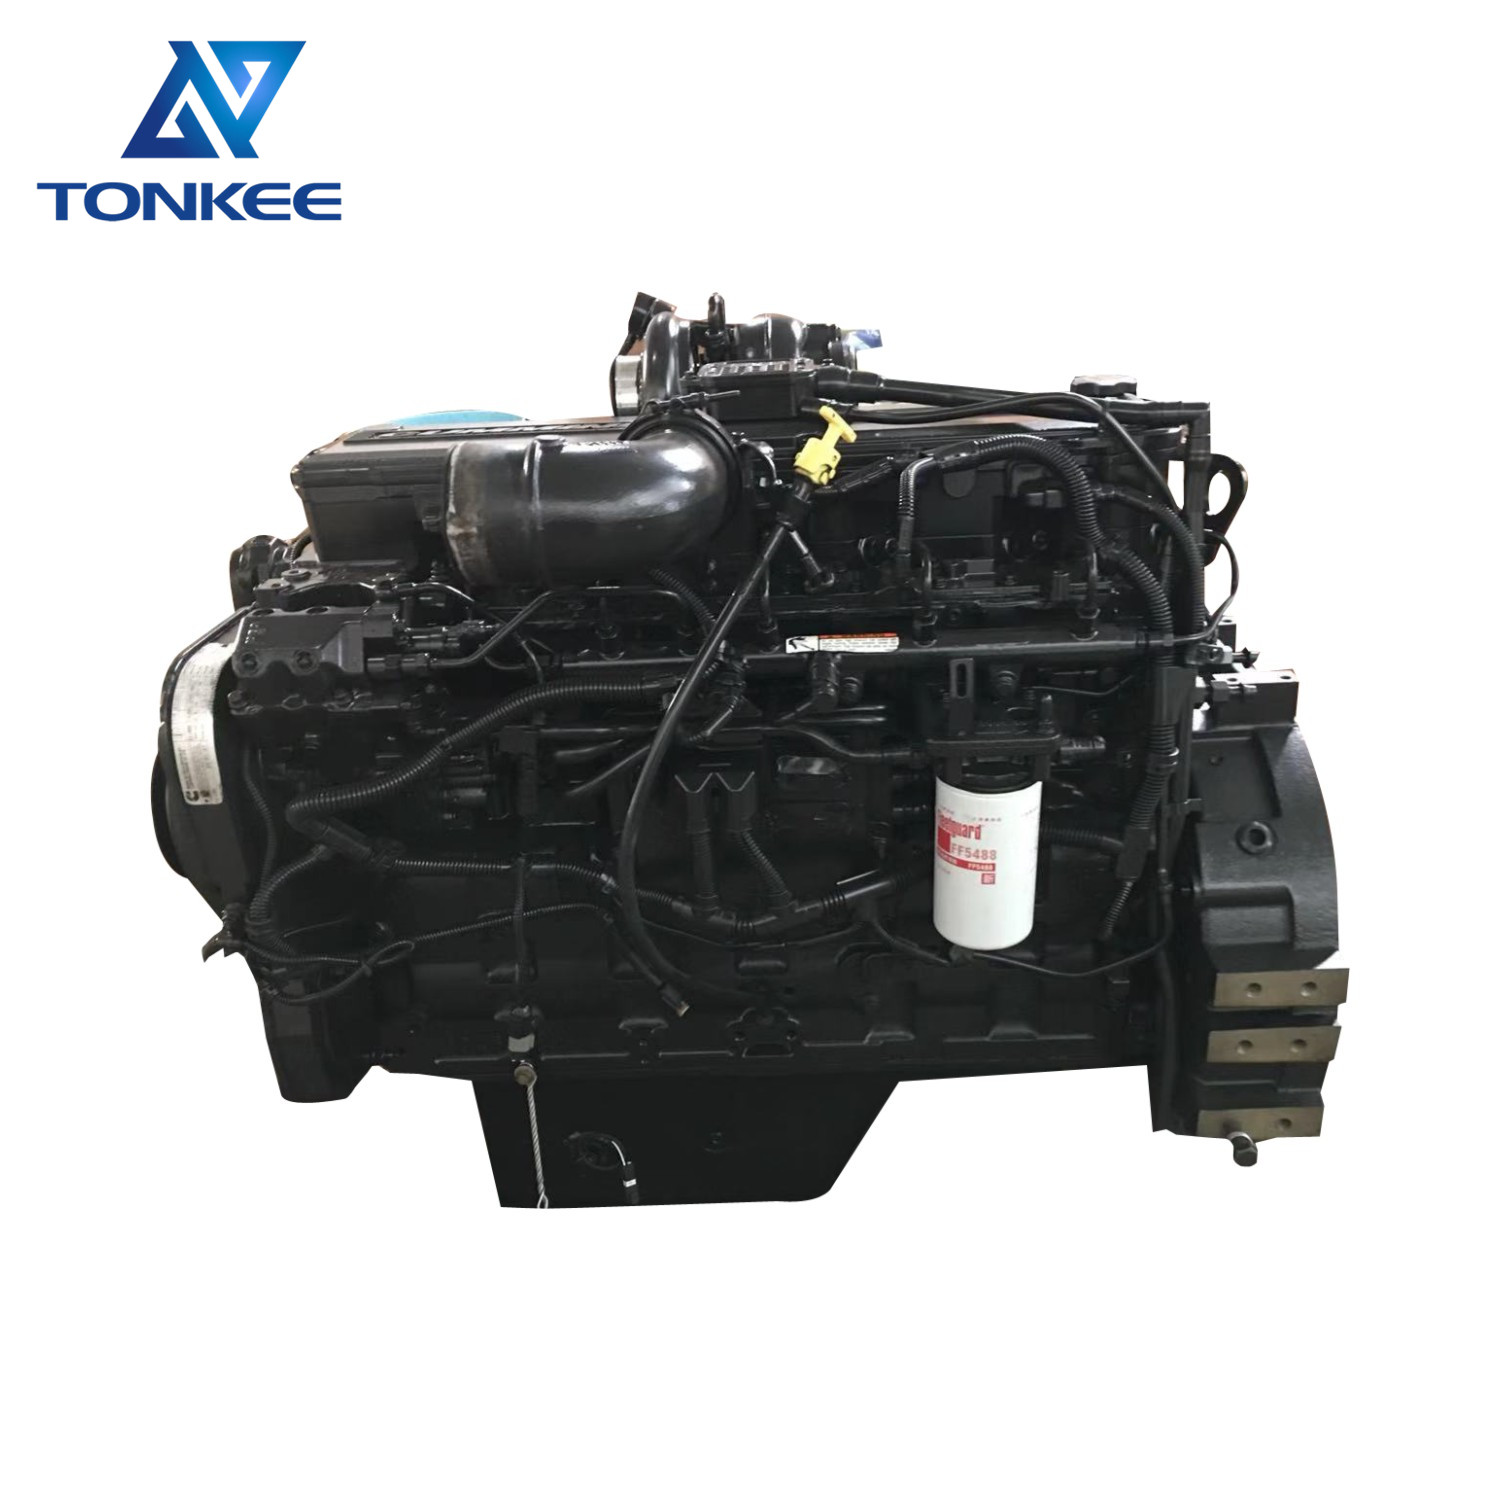 NEW SAA6D114E-3 6D114-3 complete diesel engine assy PC300-8 PC350-8 PC360-8 excavator whole diesel engine assembly with 4933120